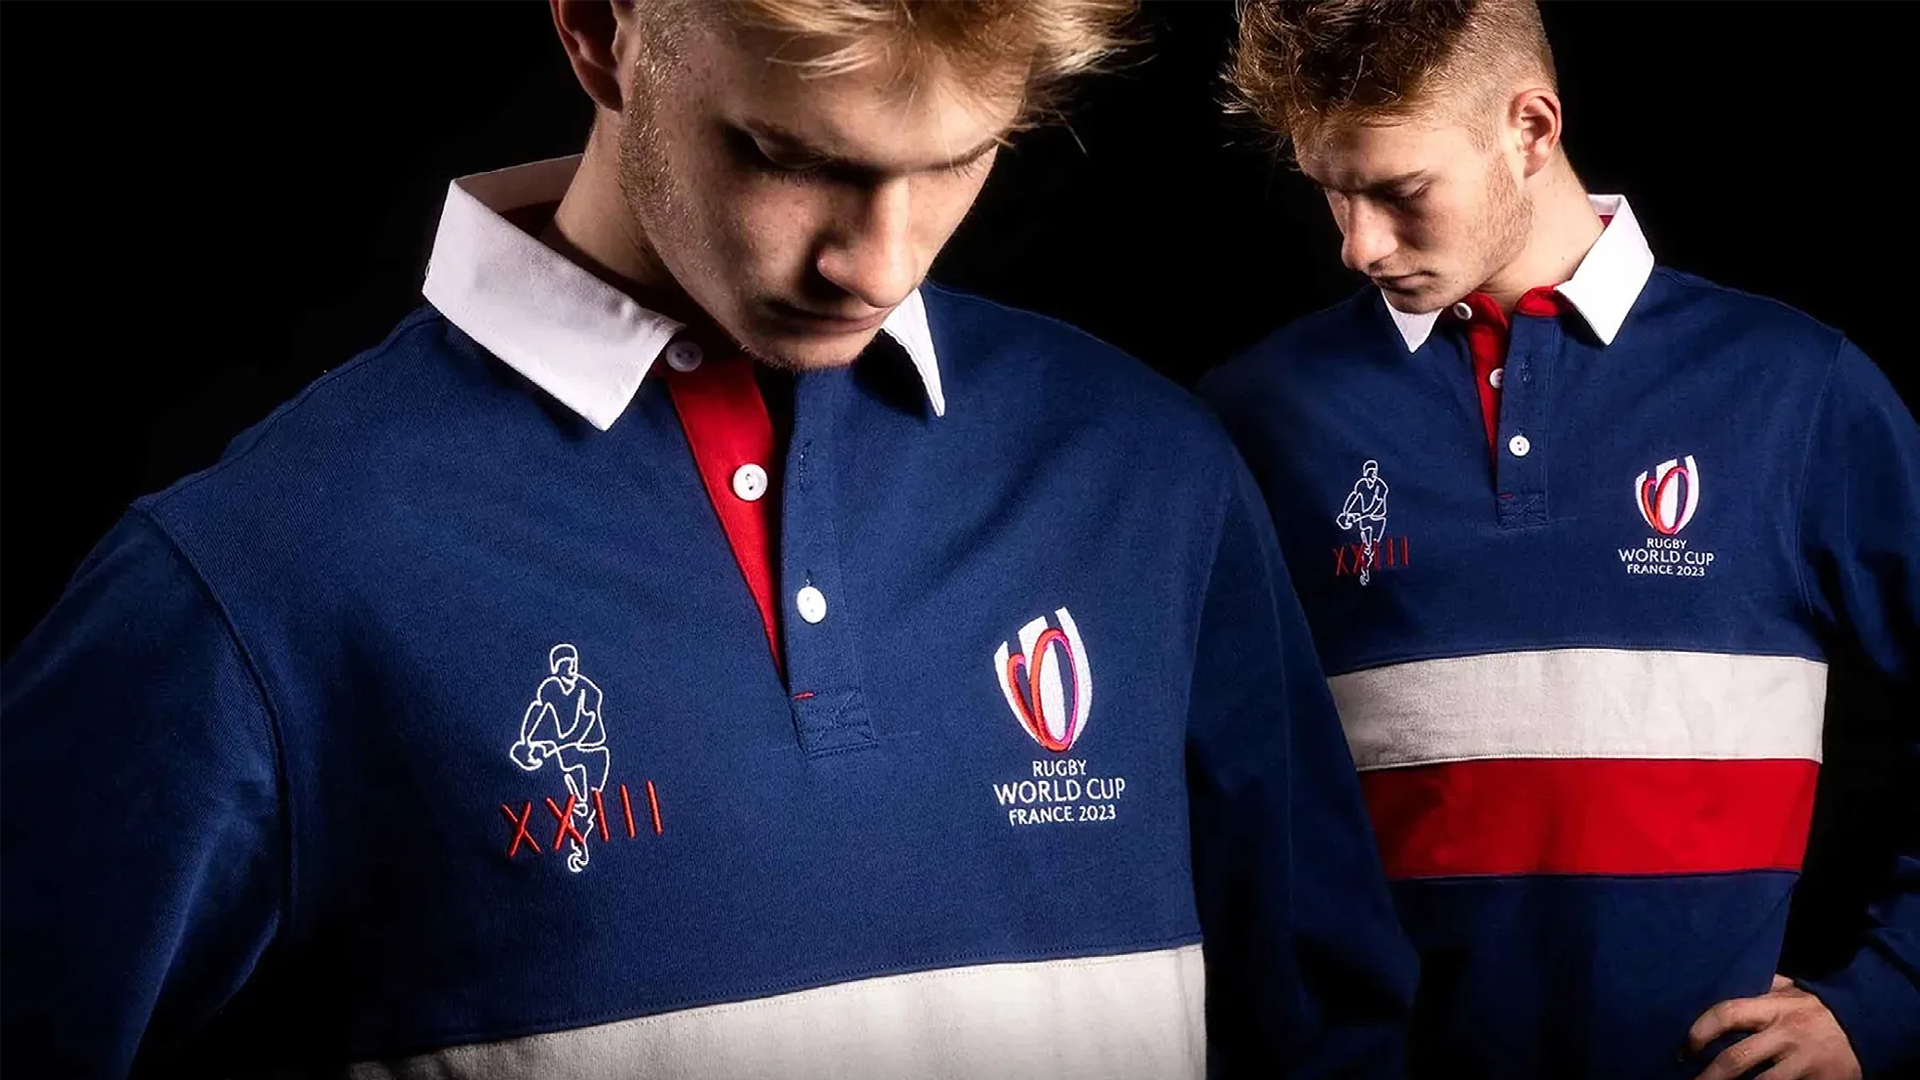 Rugby World Cup France 2023 shirt, Skew